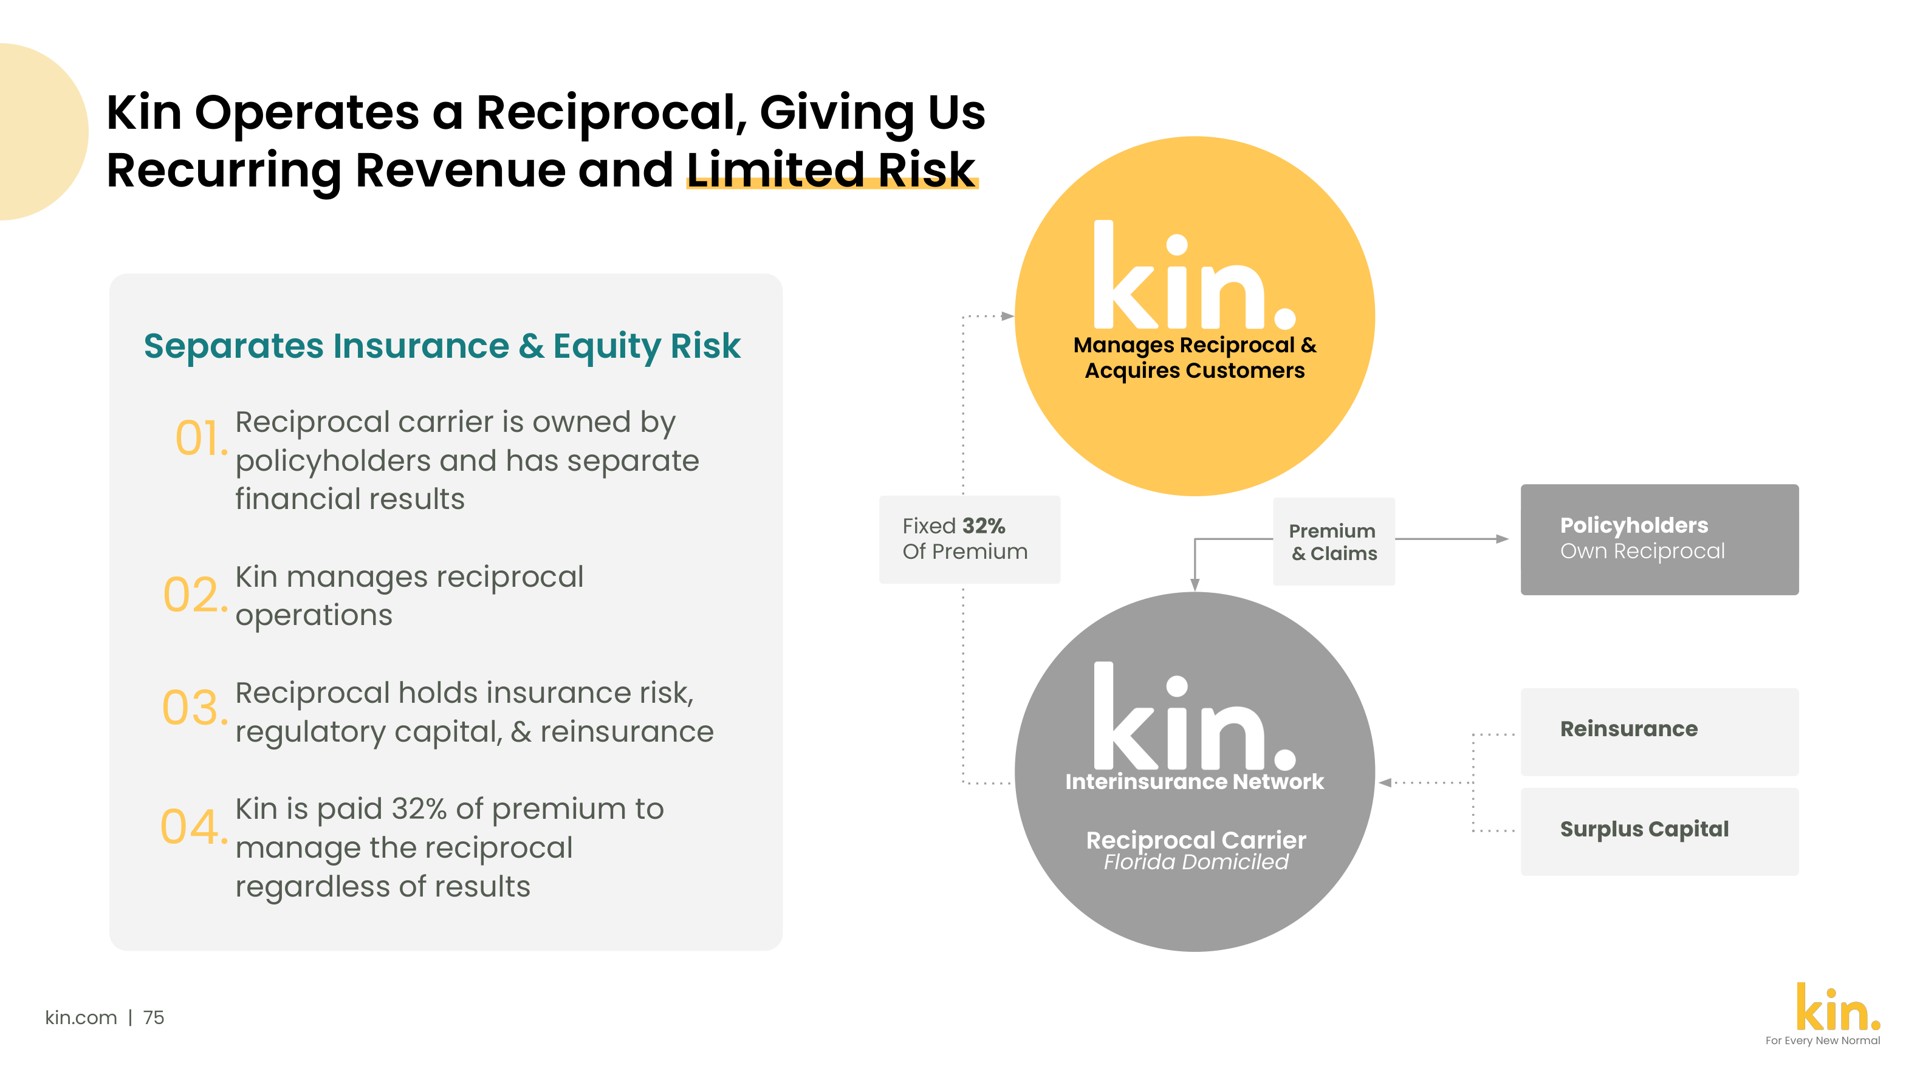 kin operates a reciprocal giving us recurring revenue and limited risk | Kin